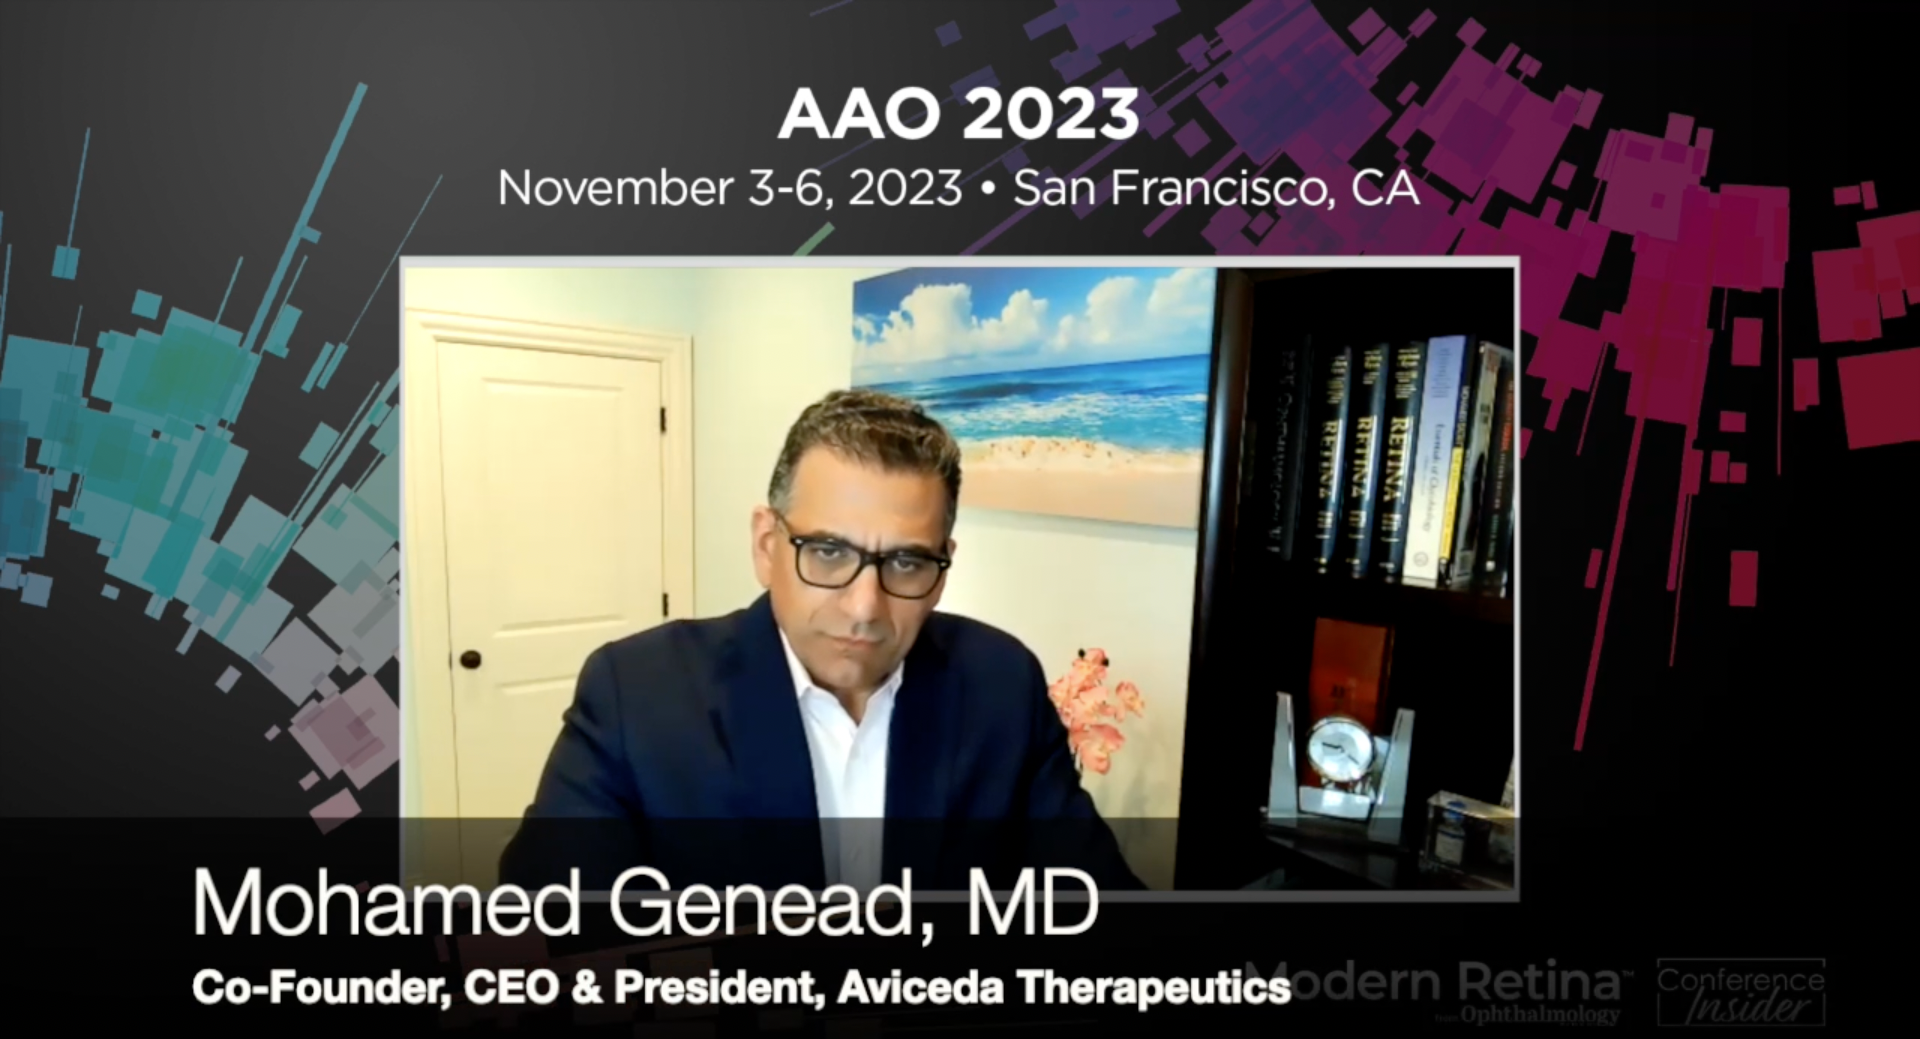 AAO 2023: AVD-104 and the results of the phase II/III part 1 SIGLEC trial